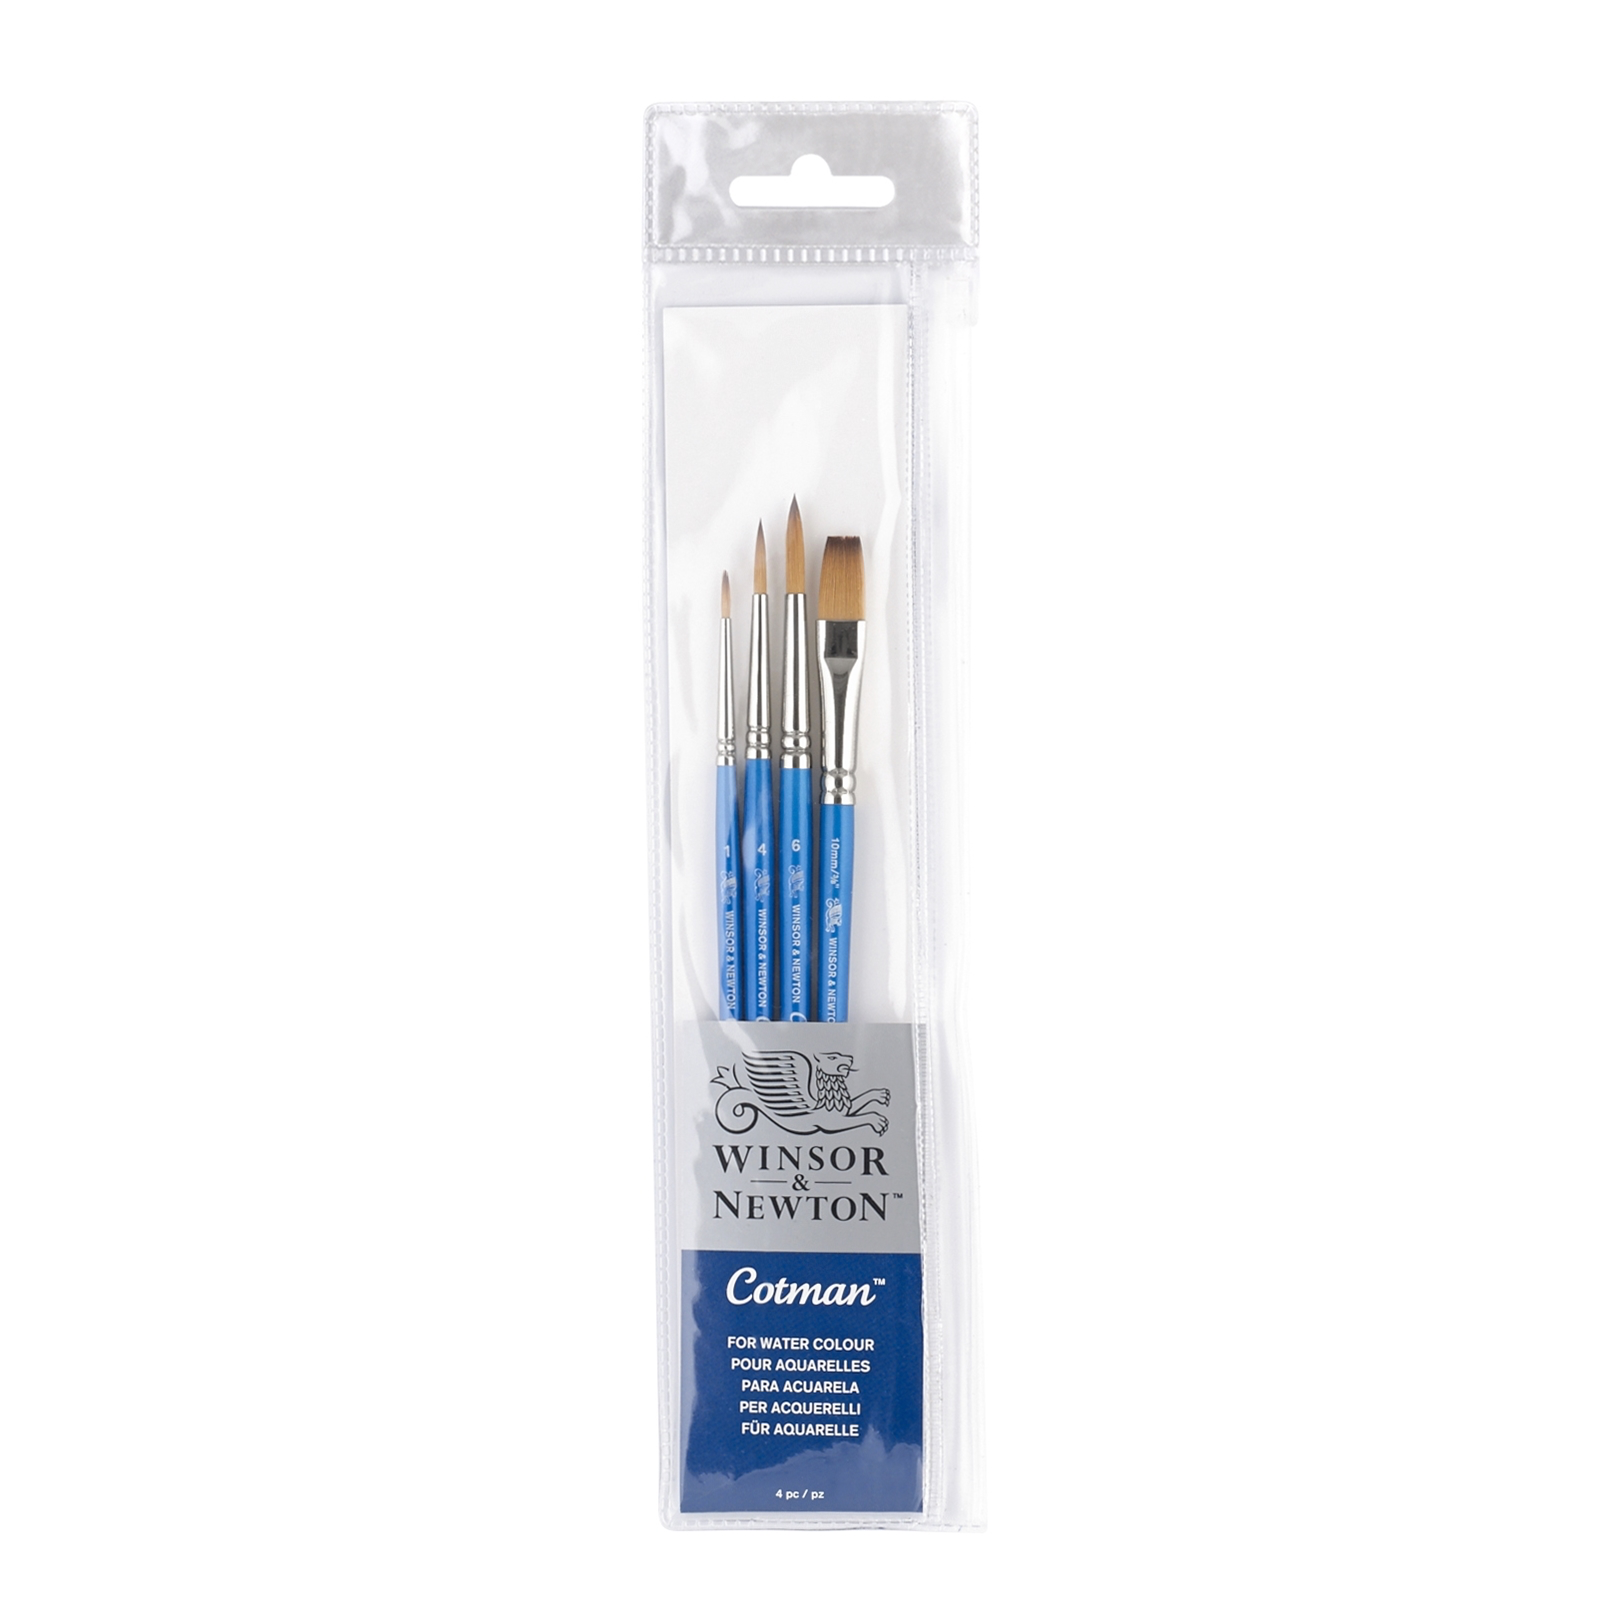 Winsor and Newton : Cotman Watercolour Brush : Set of 4 paperstory